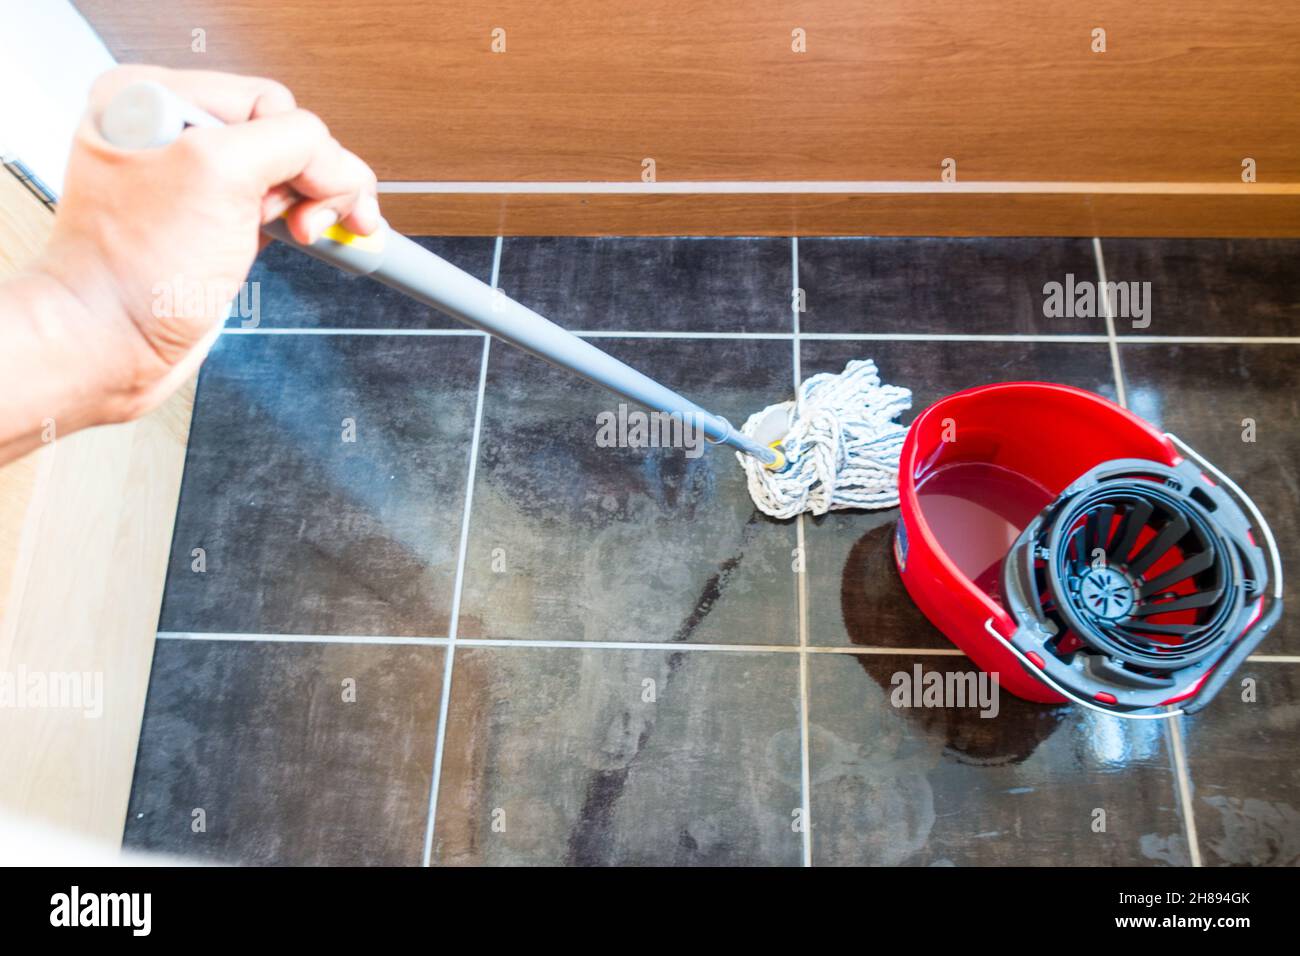 Adult asian male mopping tiled floor with a rope mop and a mop bucket Stock Photo